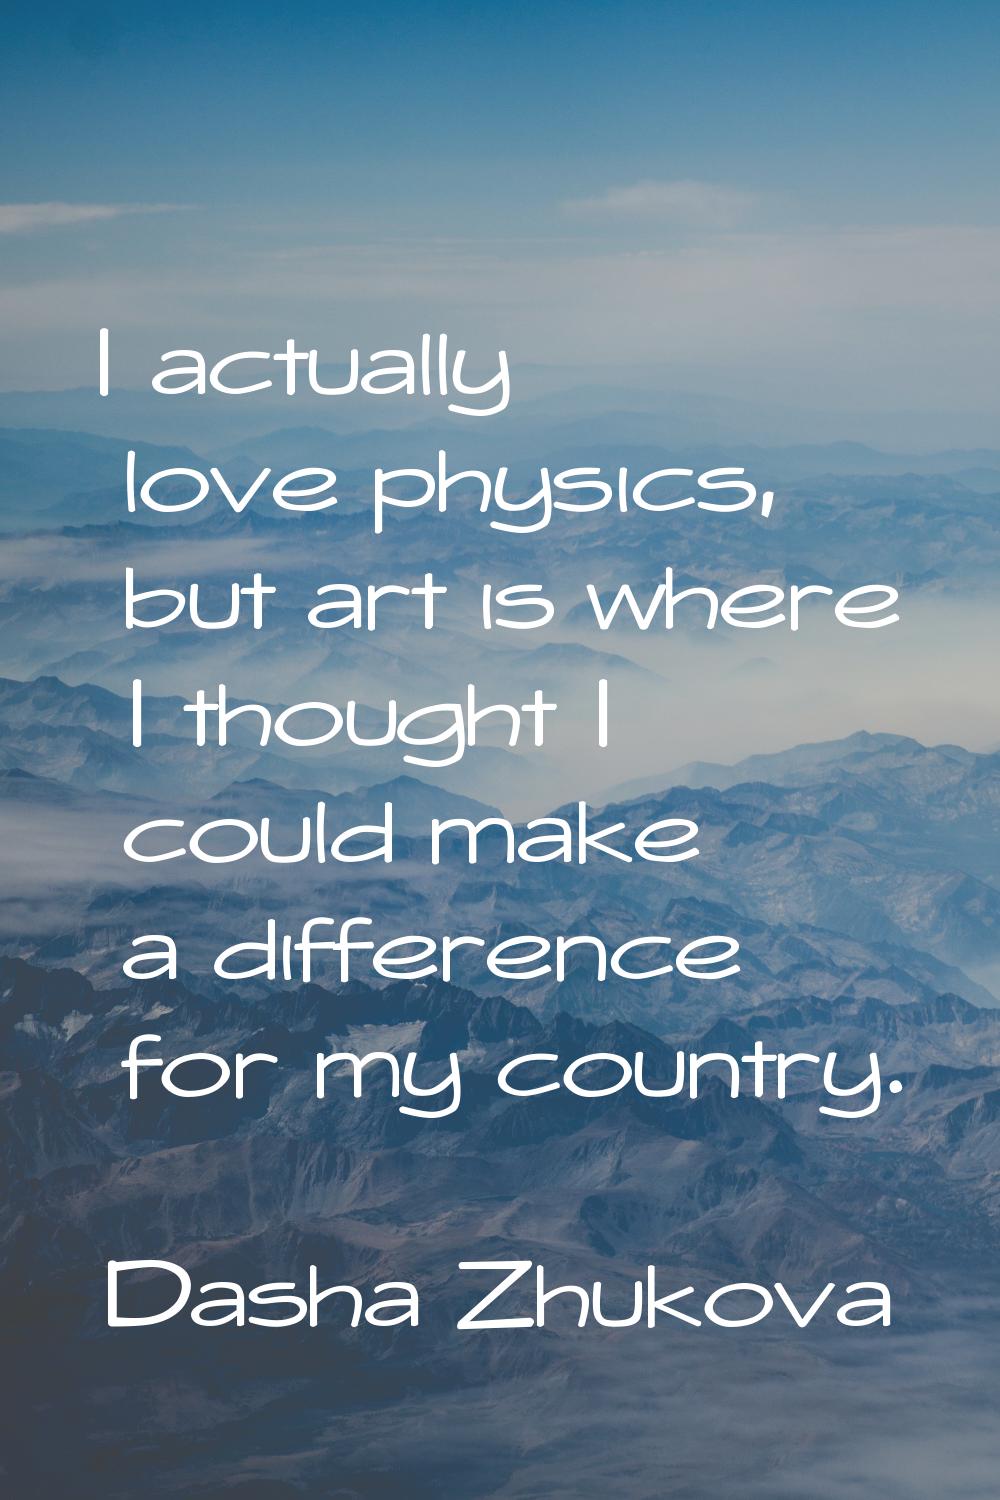 I actually love physics, but art is where I thought I could make a difference for my country.